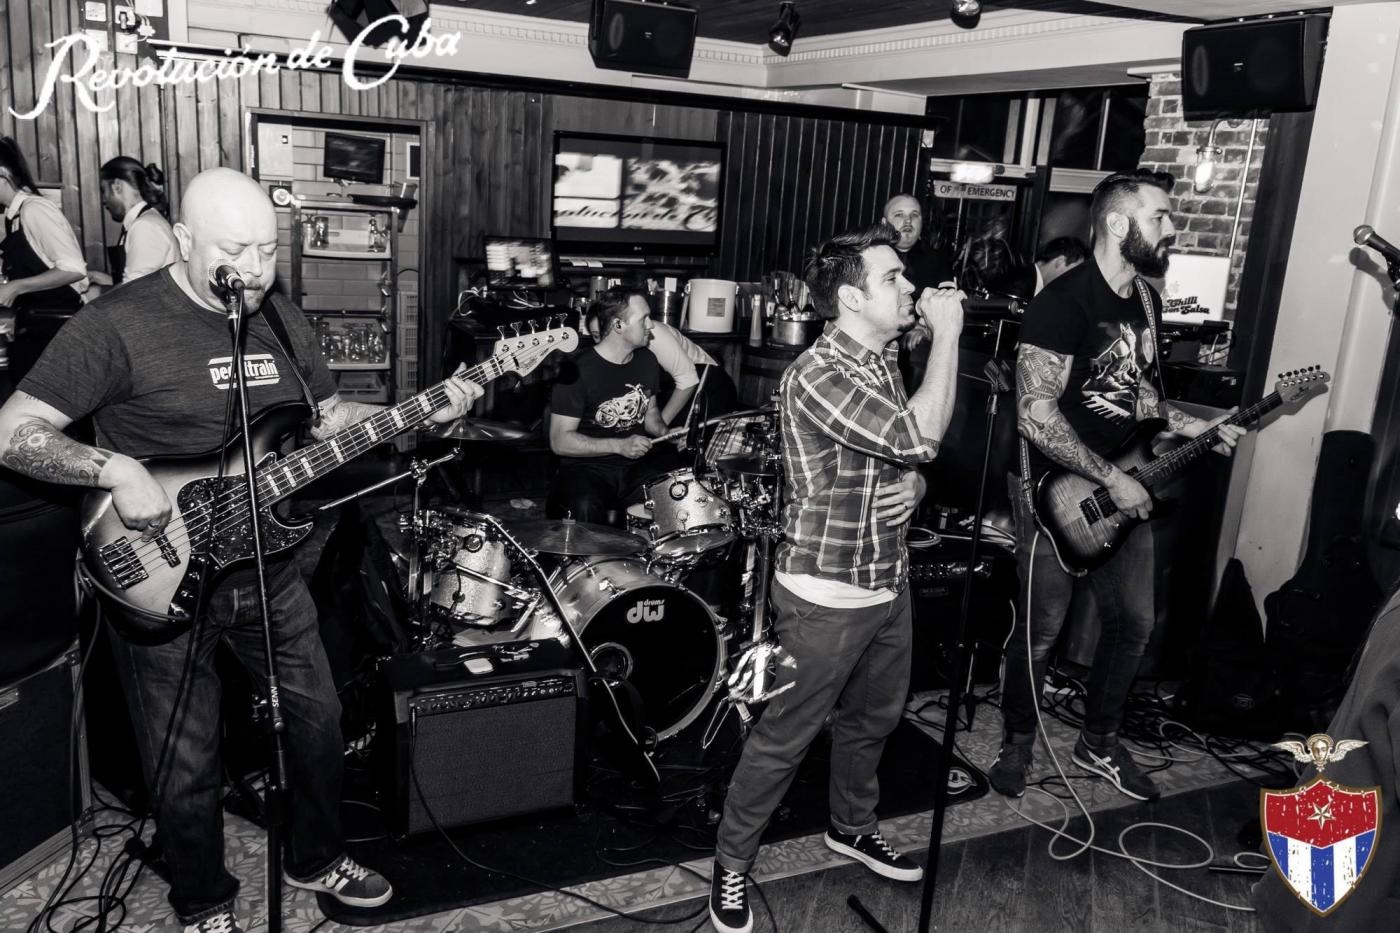 Agent Orange band performing in a pub